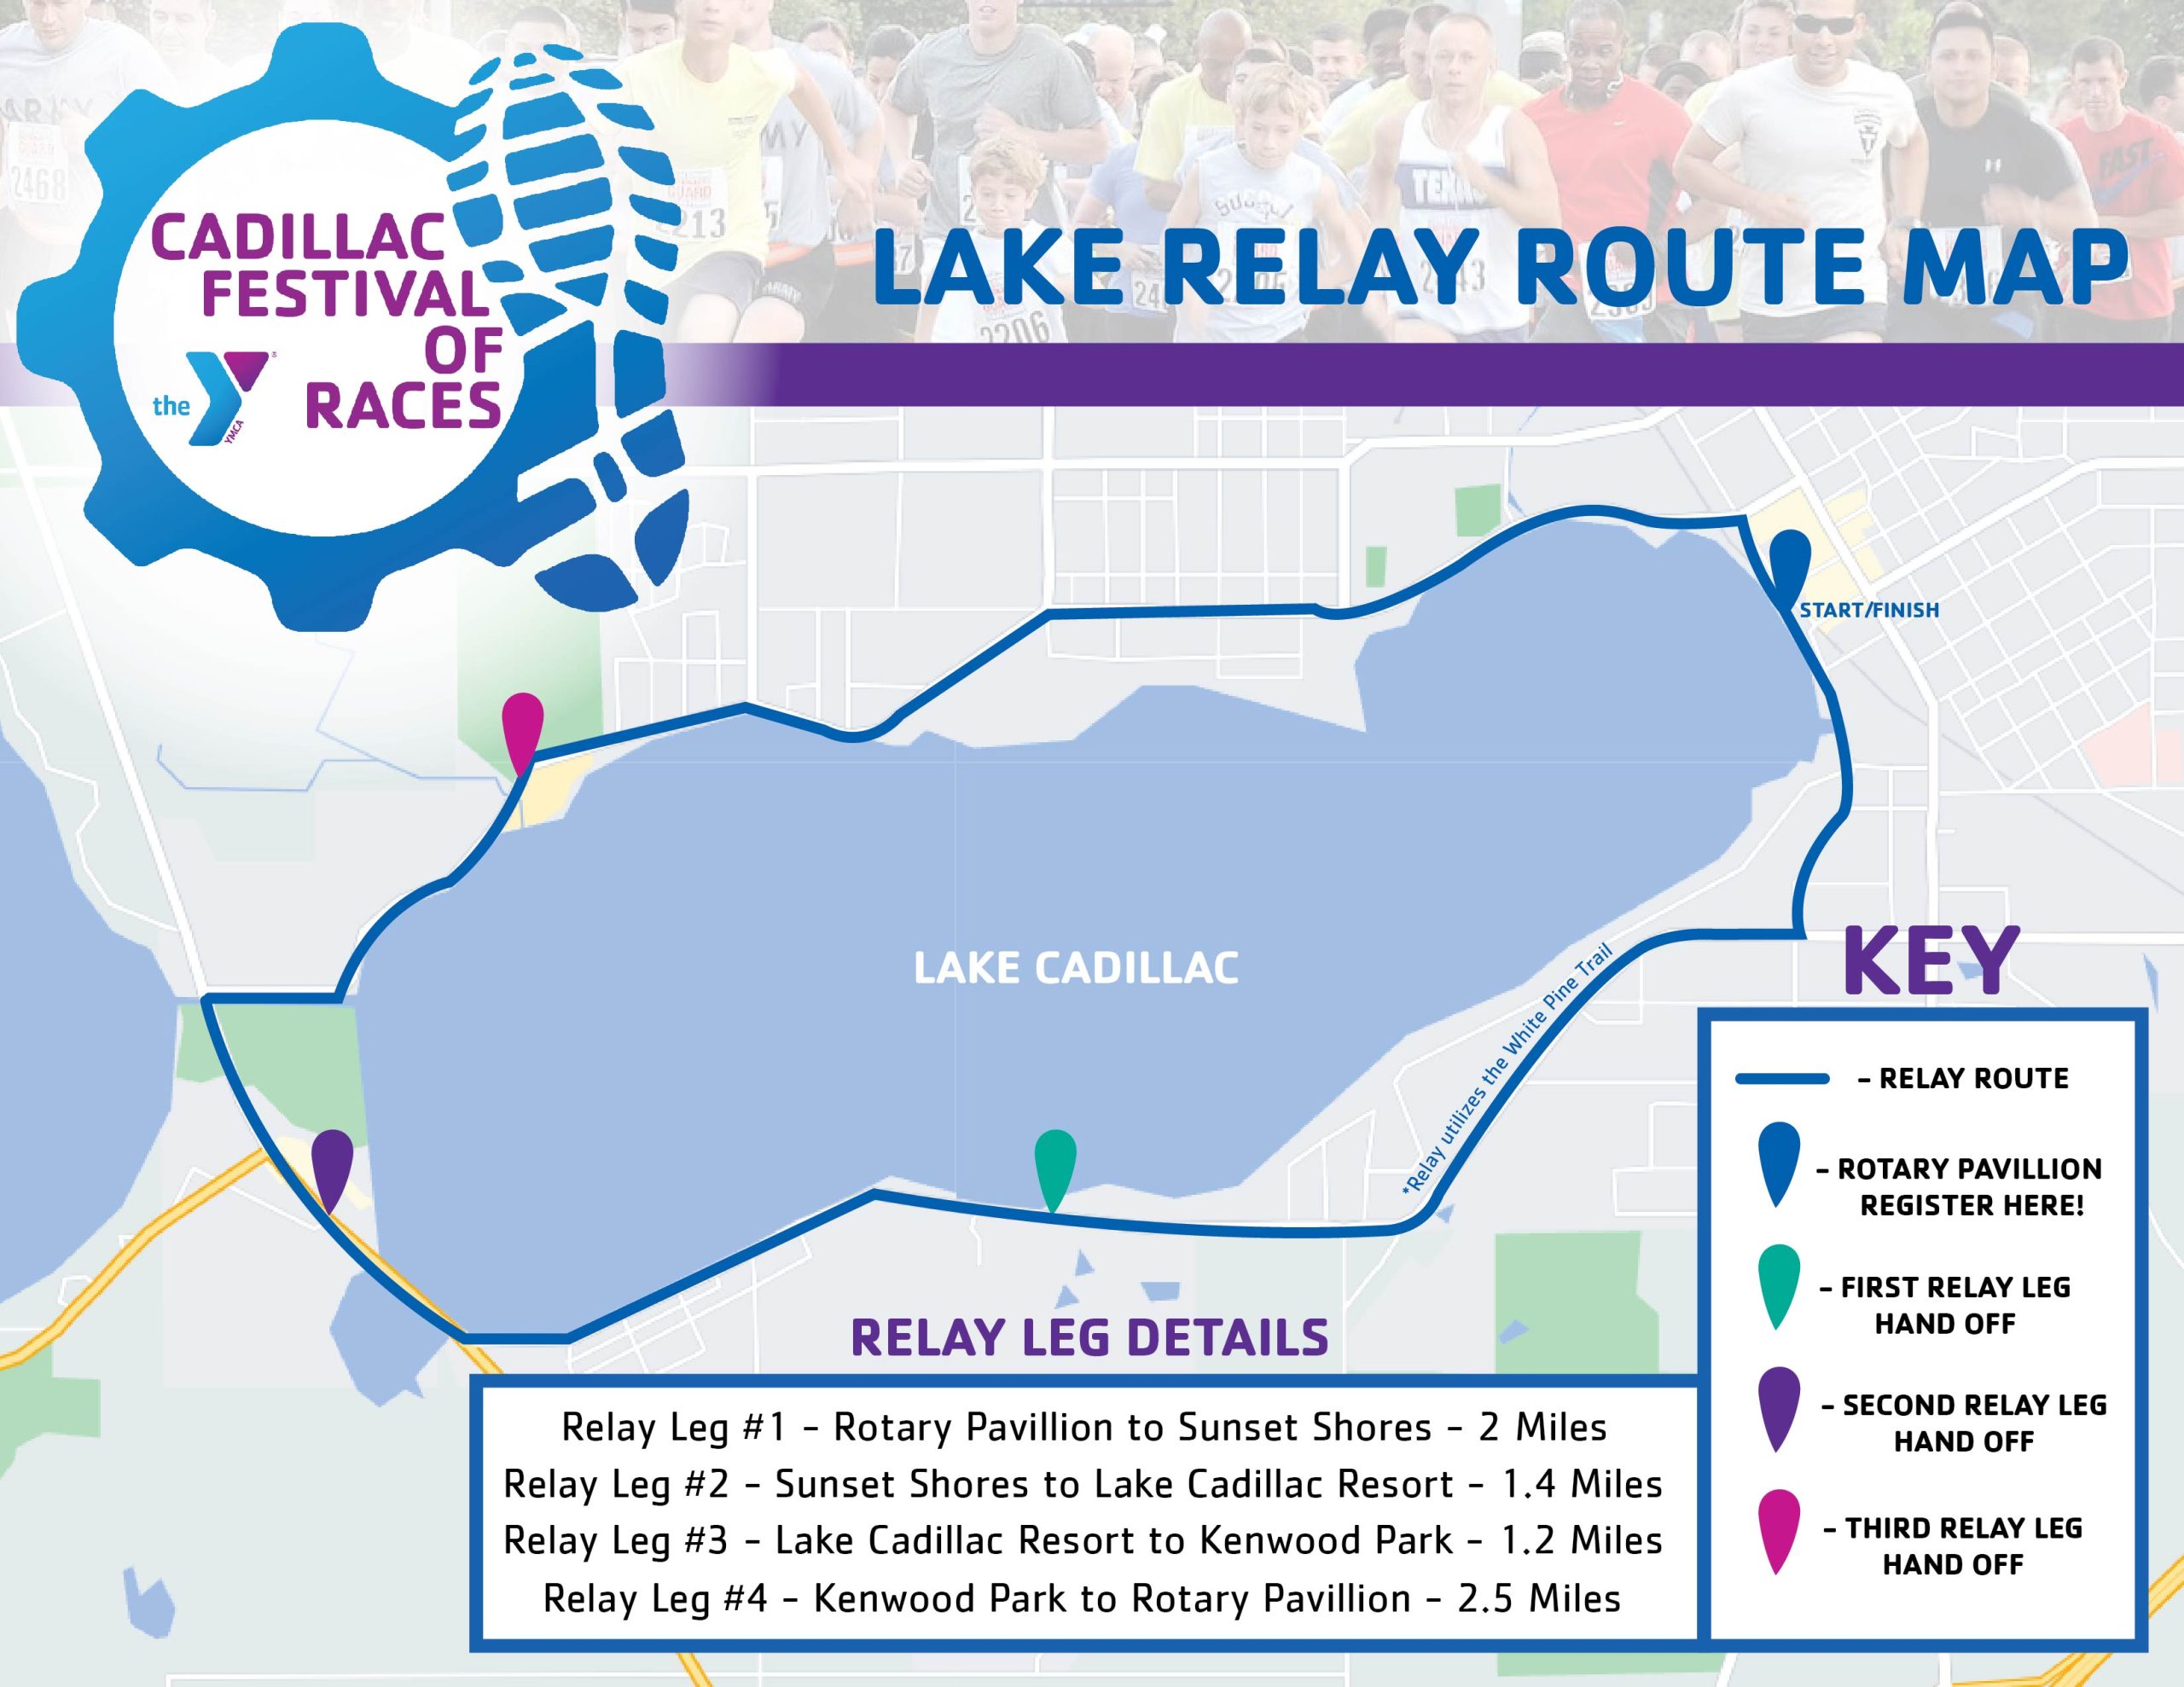 Relay Route Map